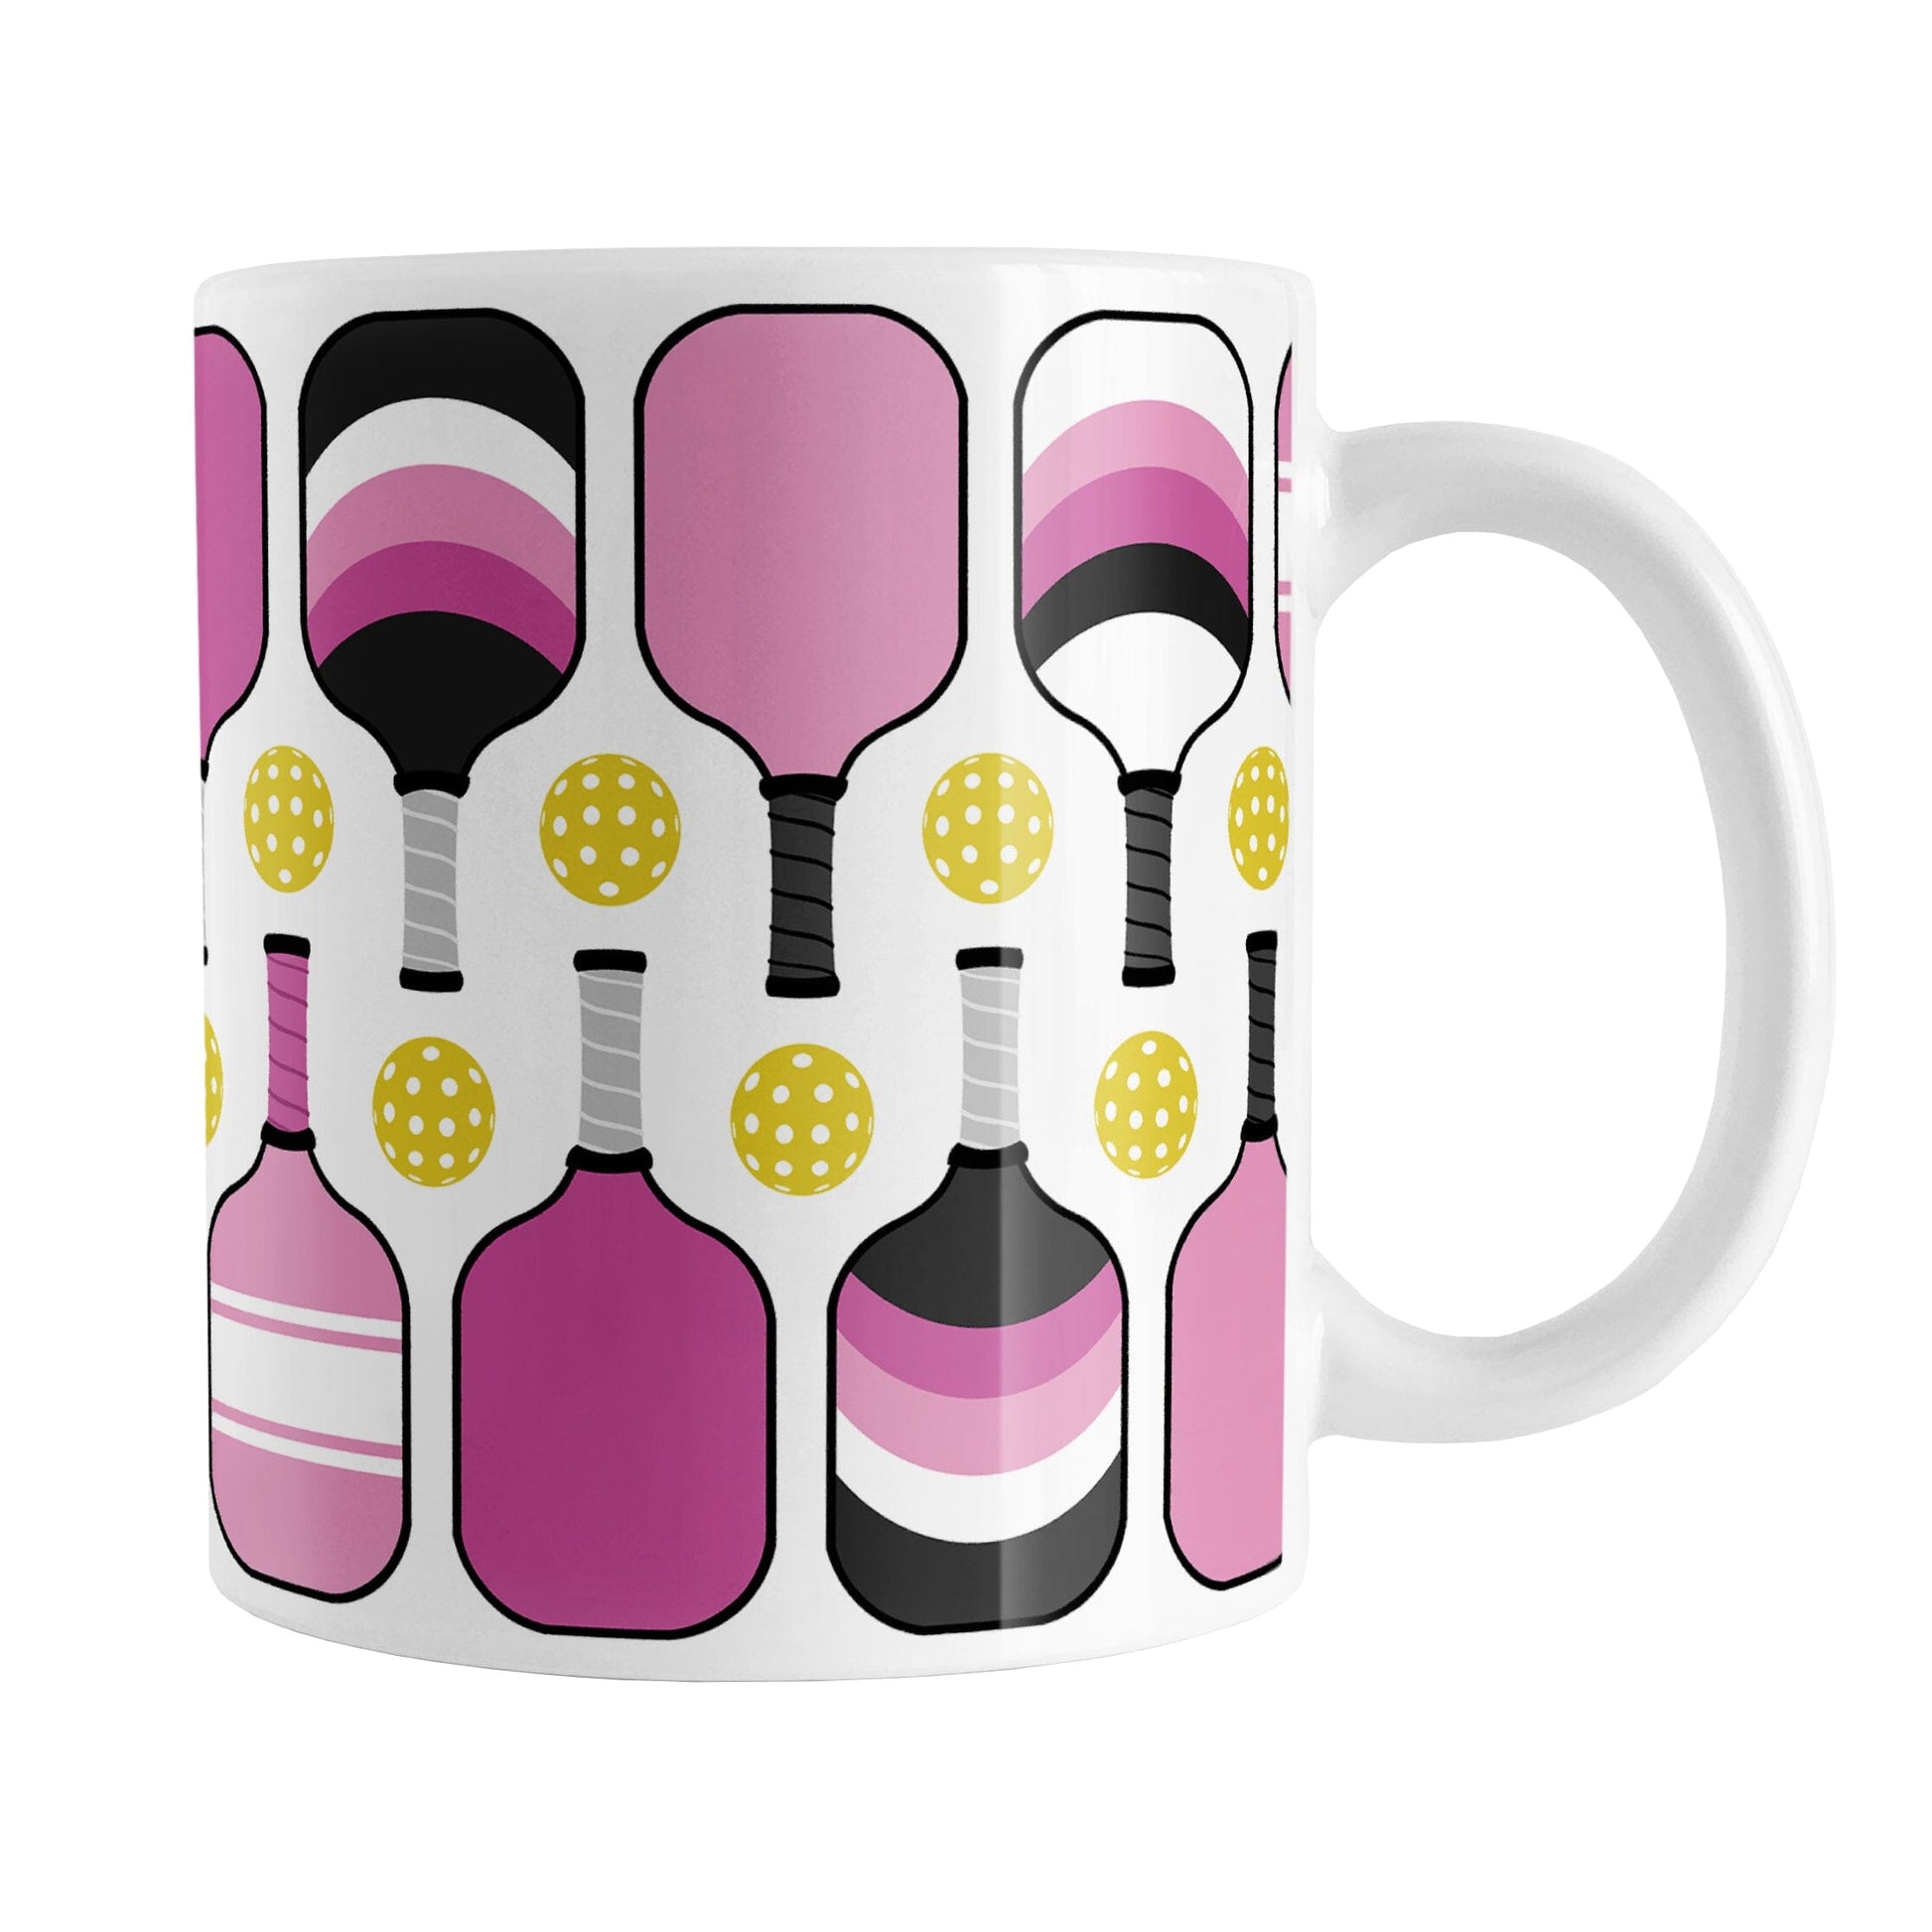 Pink Pickleball Mug (11oz) at Amy's Coffee Mugs. A ceramic coffee mug designed with modern pink pickleball paddles and yellow balls in a pattern that wraps around the mug up to the handle.